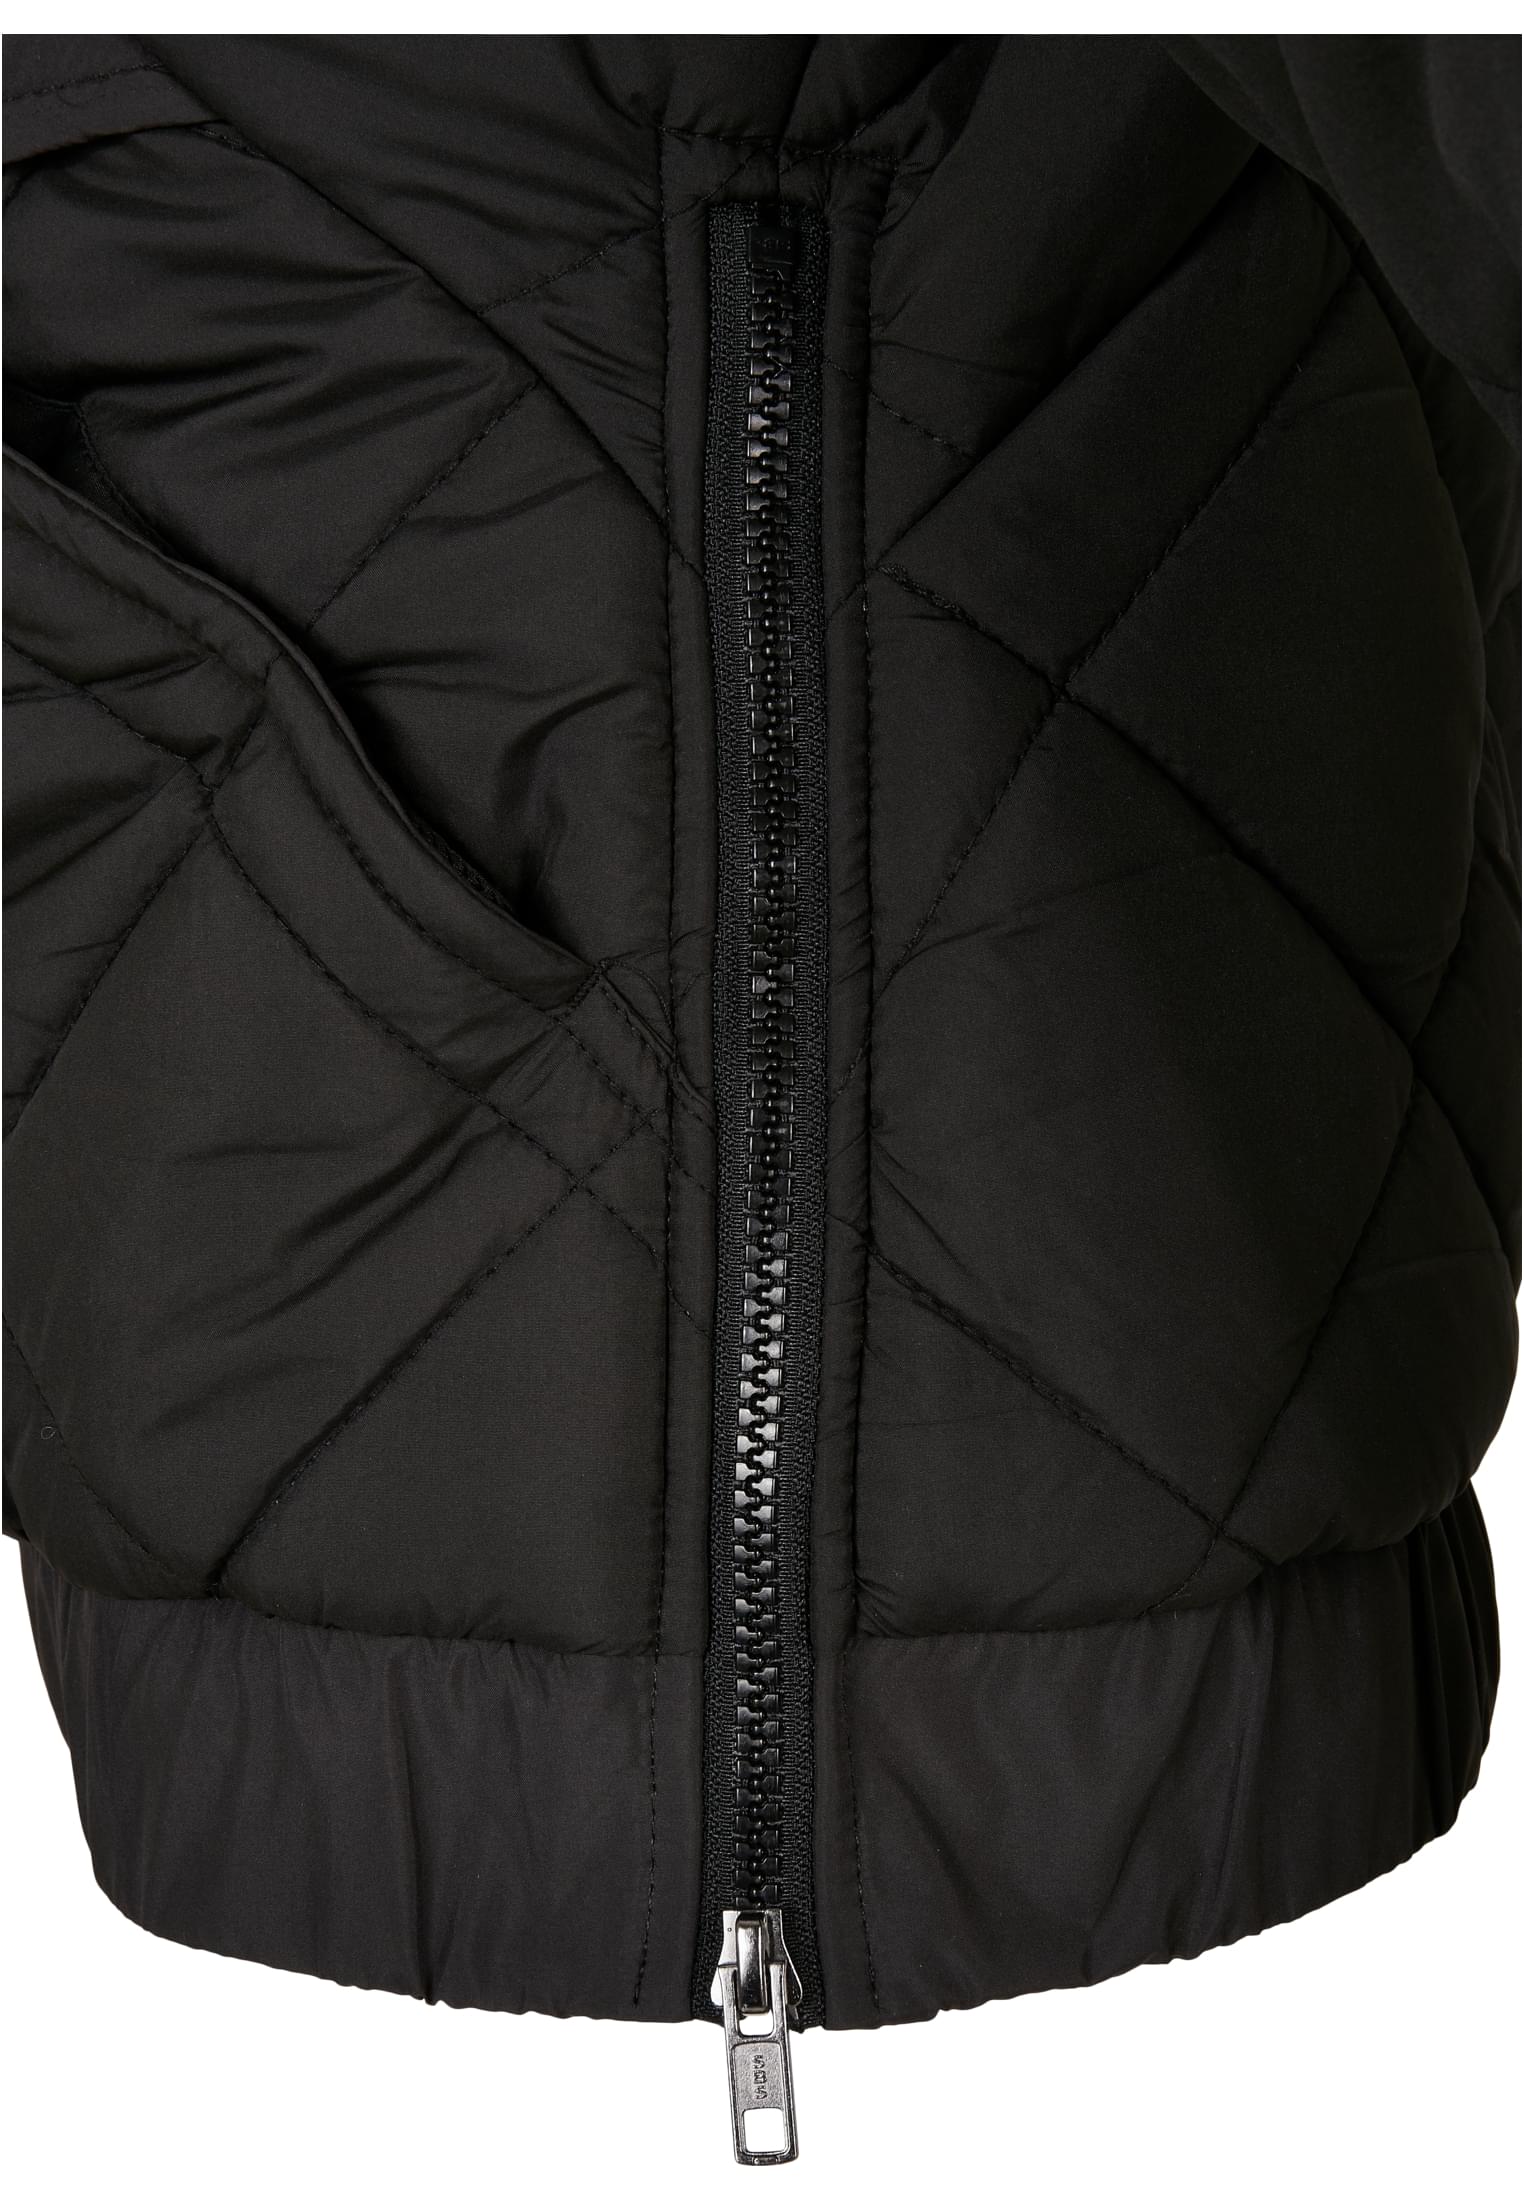 Ladies Oversized Diamond Quilted Pull Over Jacket-TB4555